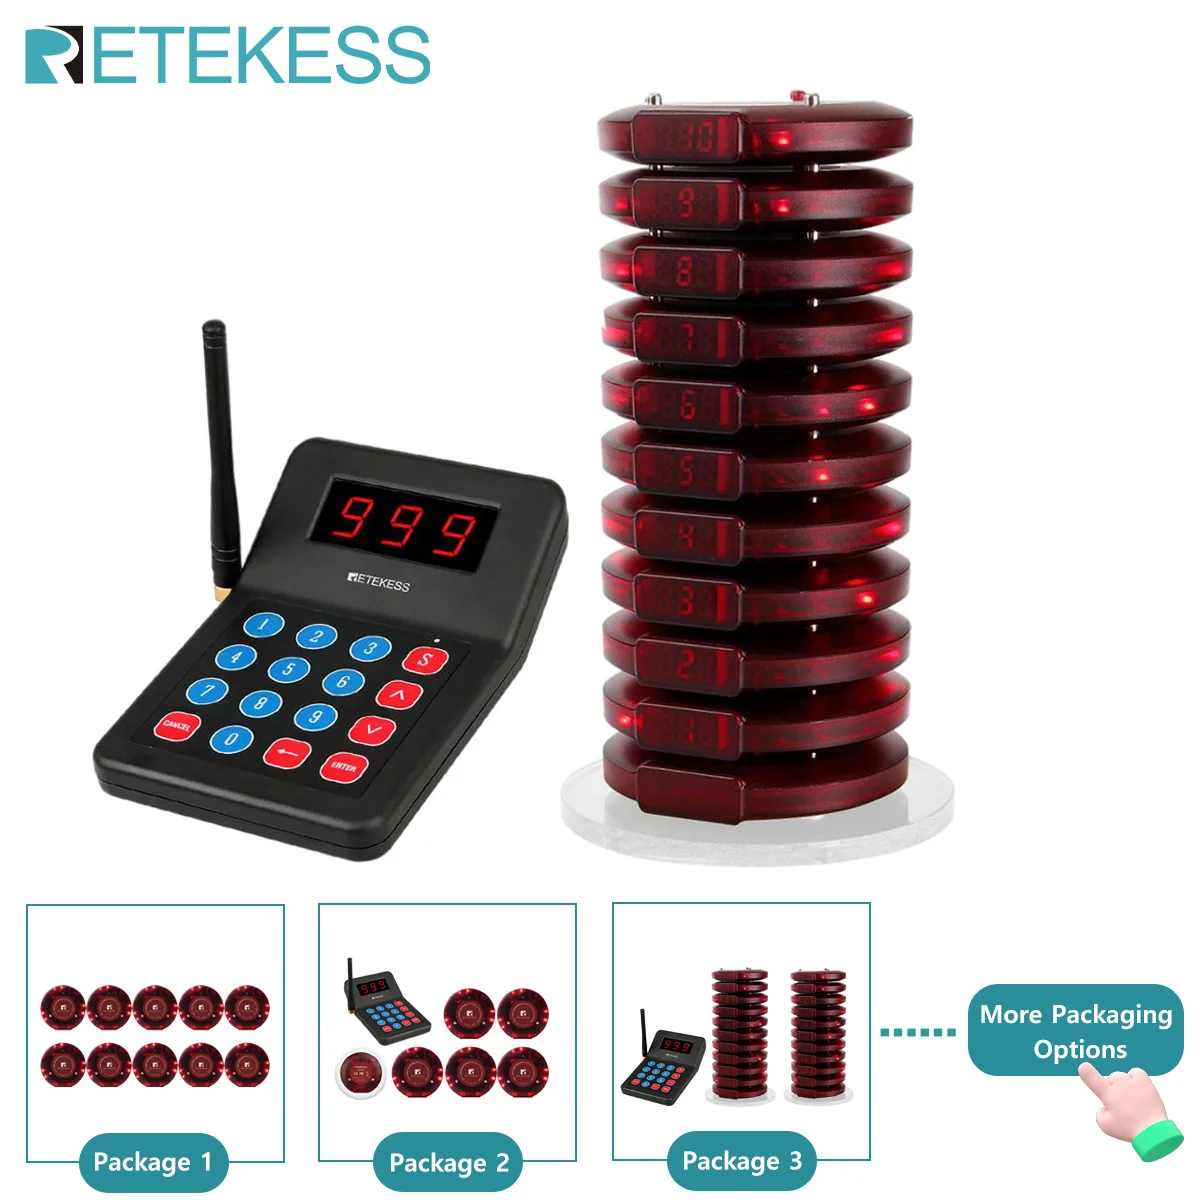 Retekess T119 Restaurant Pager Wireless Paging Calling System Coaster Vibrater Buzzer Receiver 2 Way Charge For Cafe Food Truck